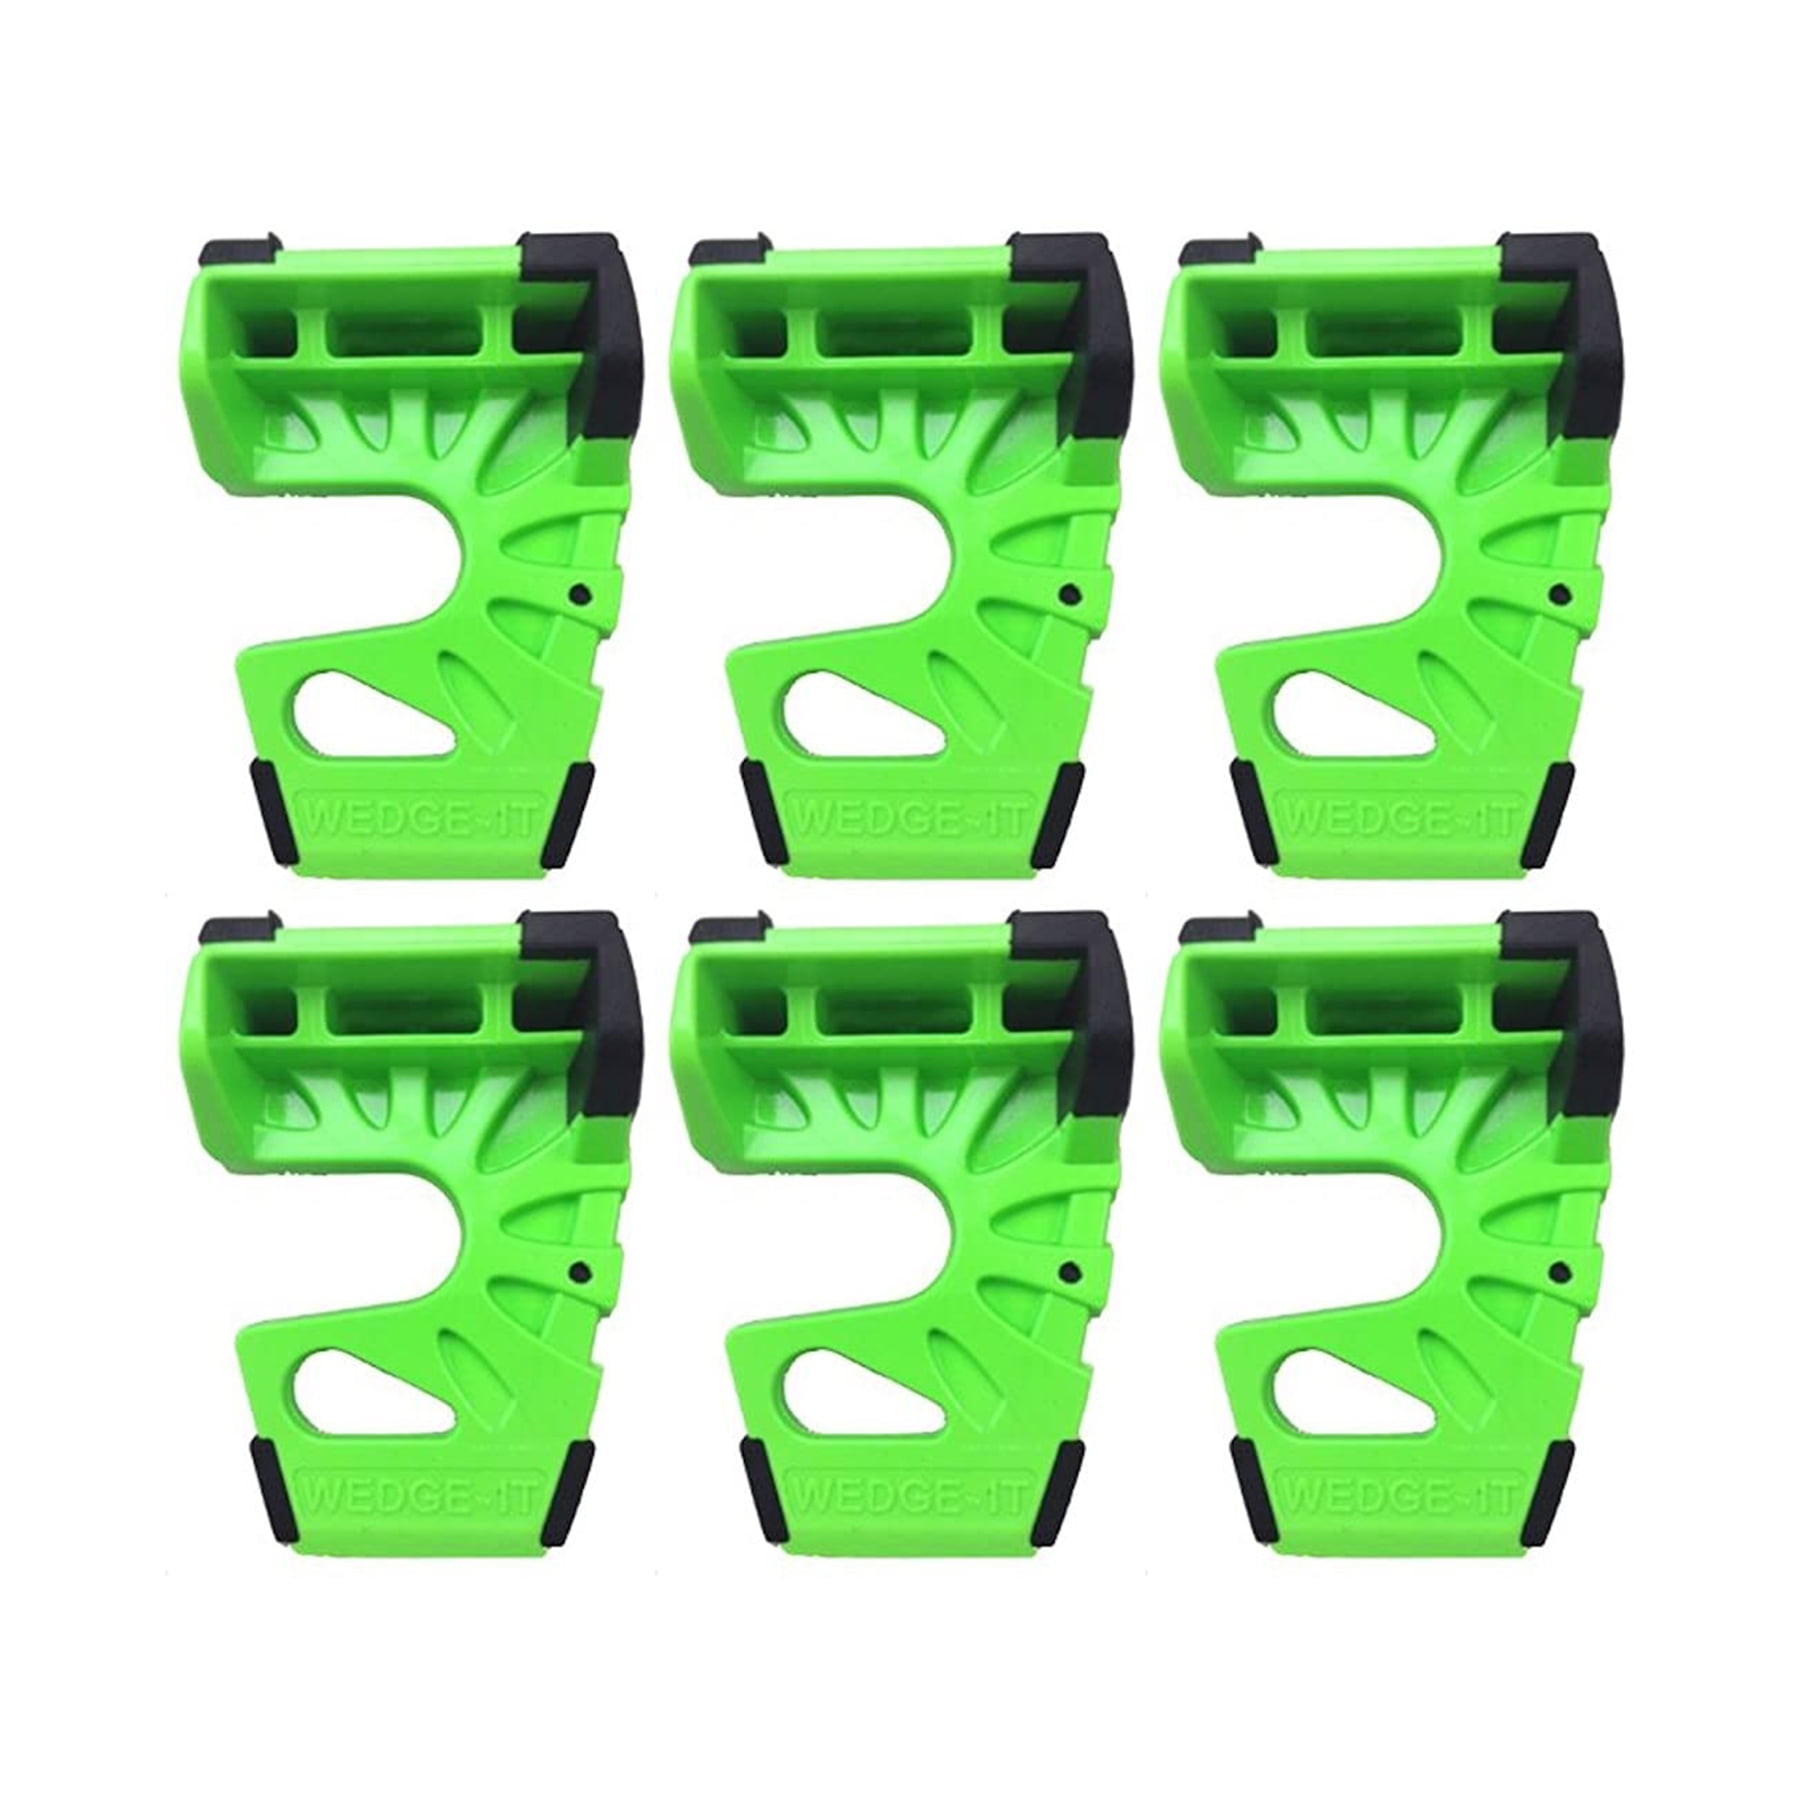 Wedge-It The Ultimate Door Stop Lime Green 12 Pack